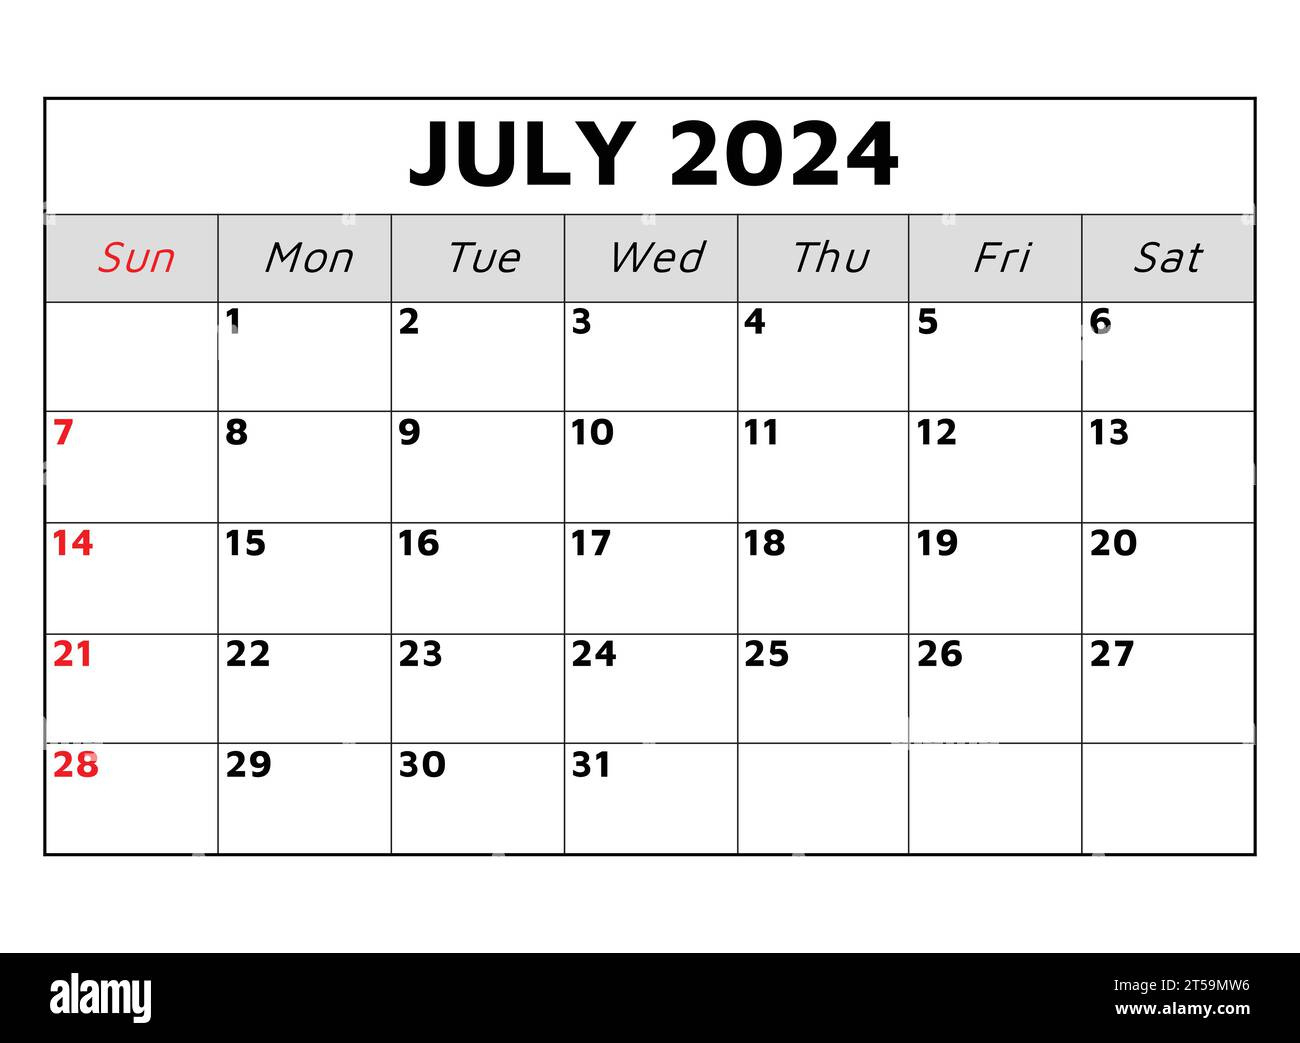 July 2024 Calendar. Vector Illustration. Monthly Planning For Your within July 2024 Calendar Vector